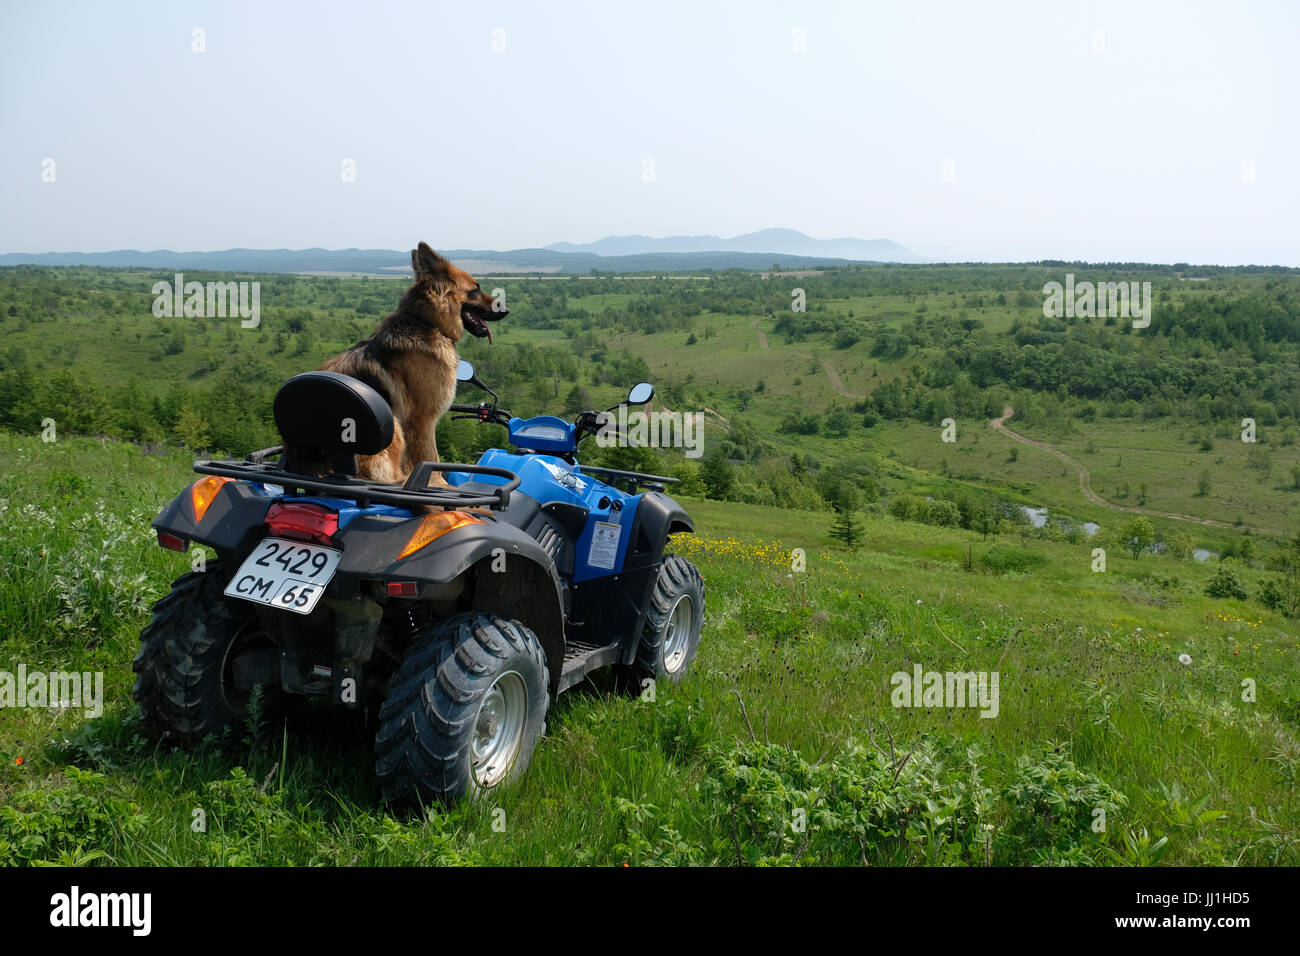 A German shepherd dog sits on an all-terrain quad bike vehicle ATV in a mountainous area in the south eastern side of the island of Sakhalin, in the Pacific Ocean. Russia Stock Photo